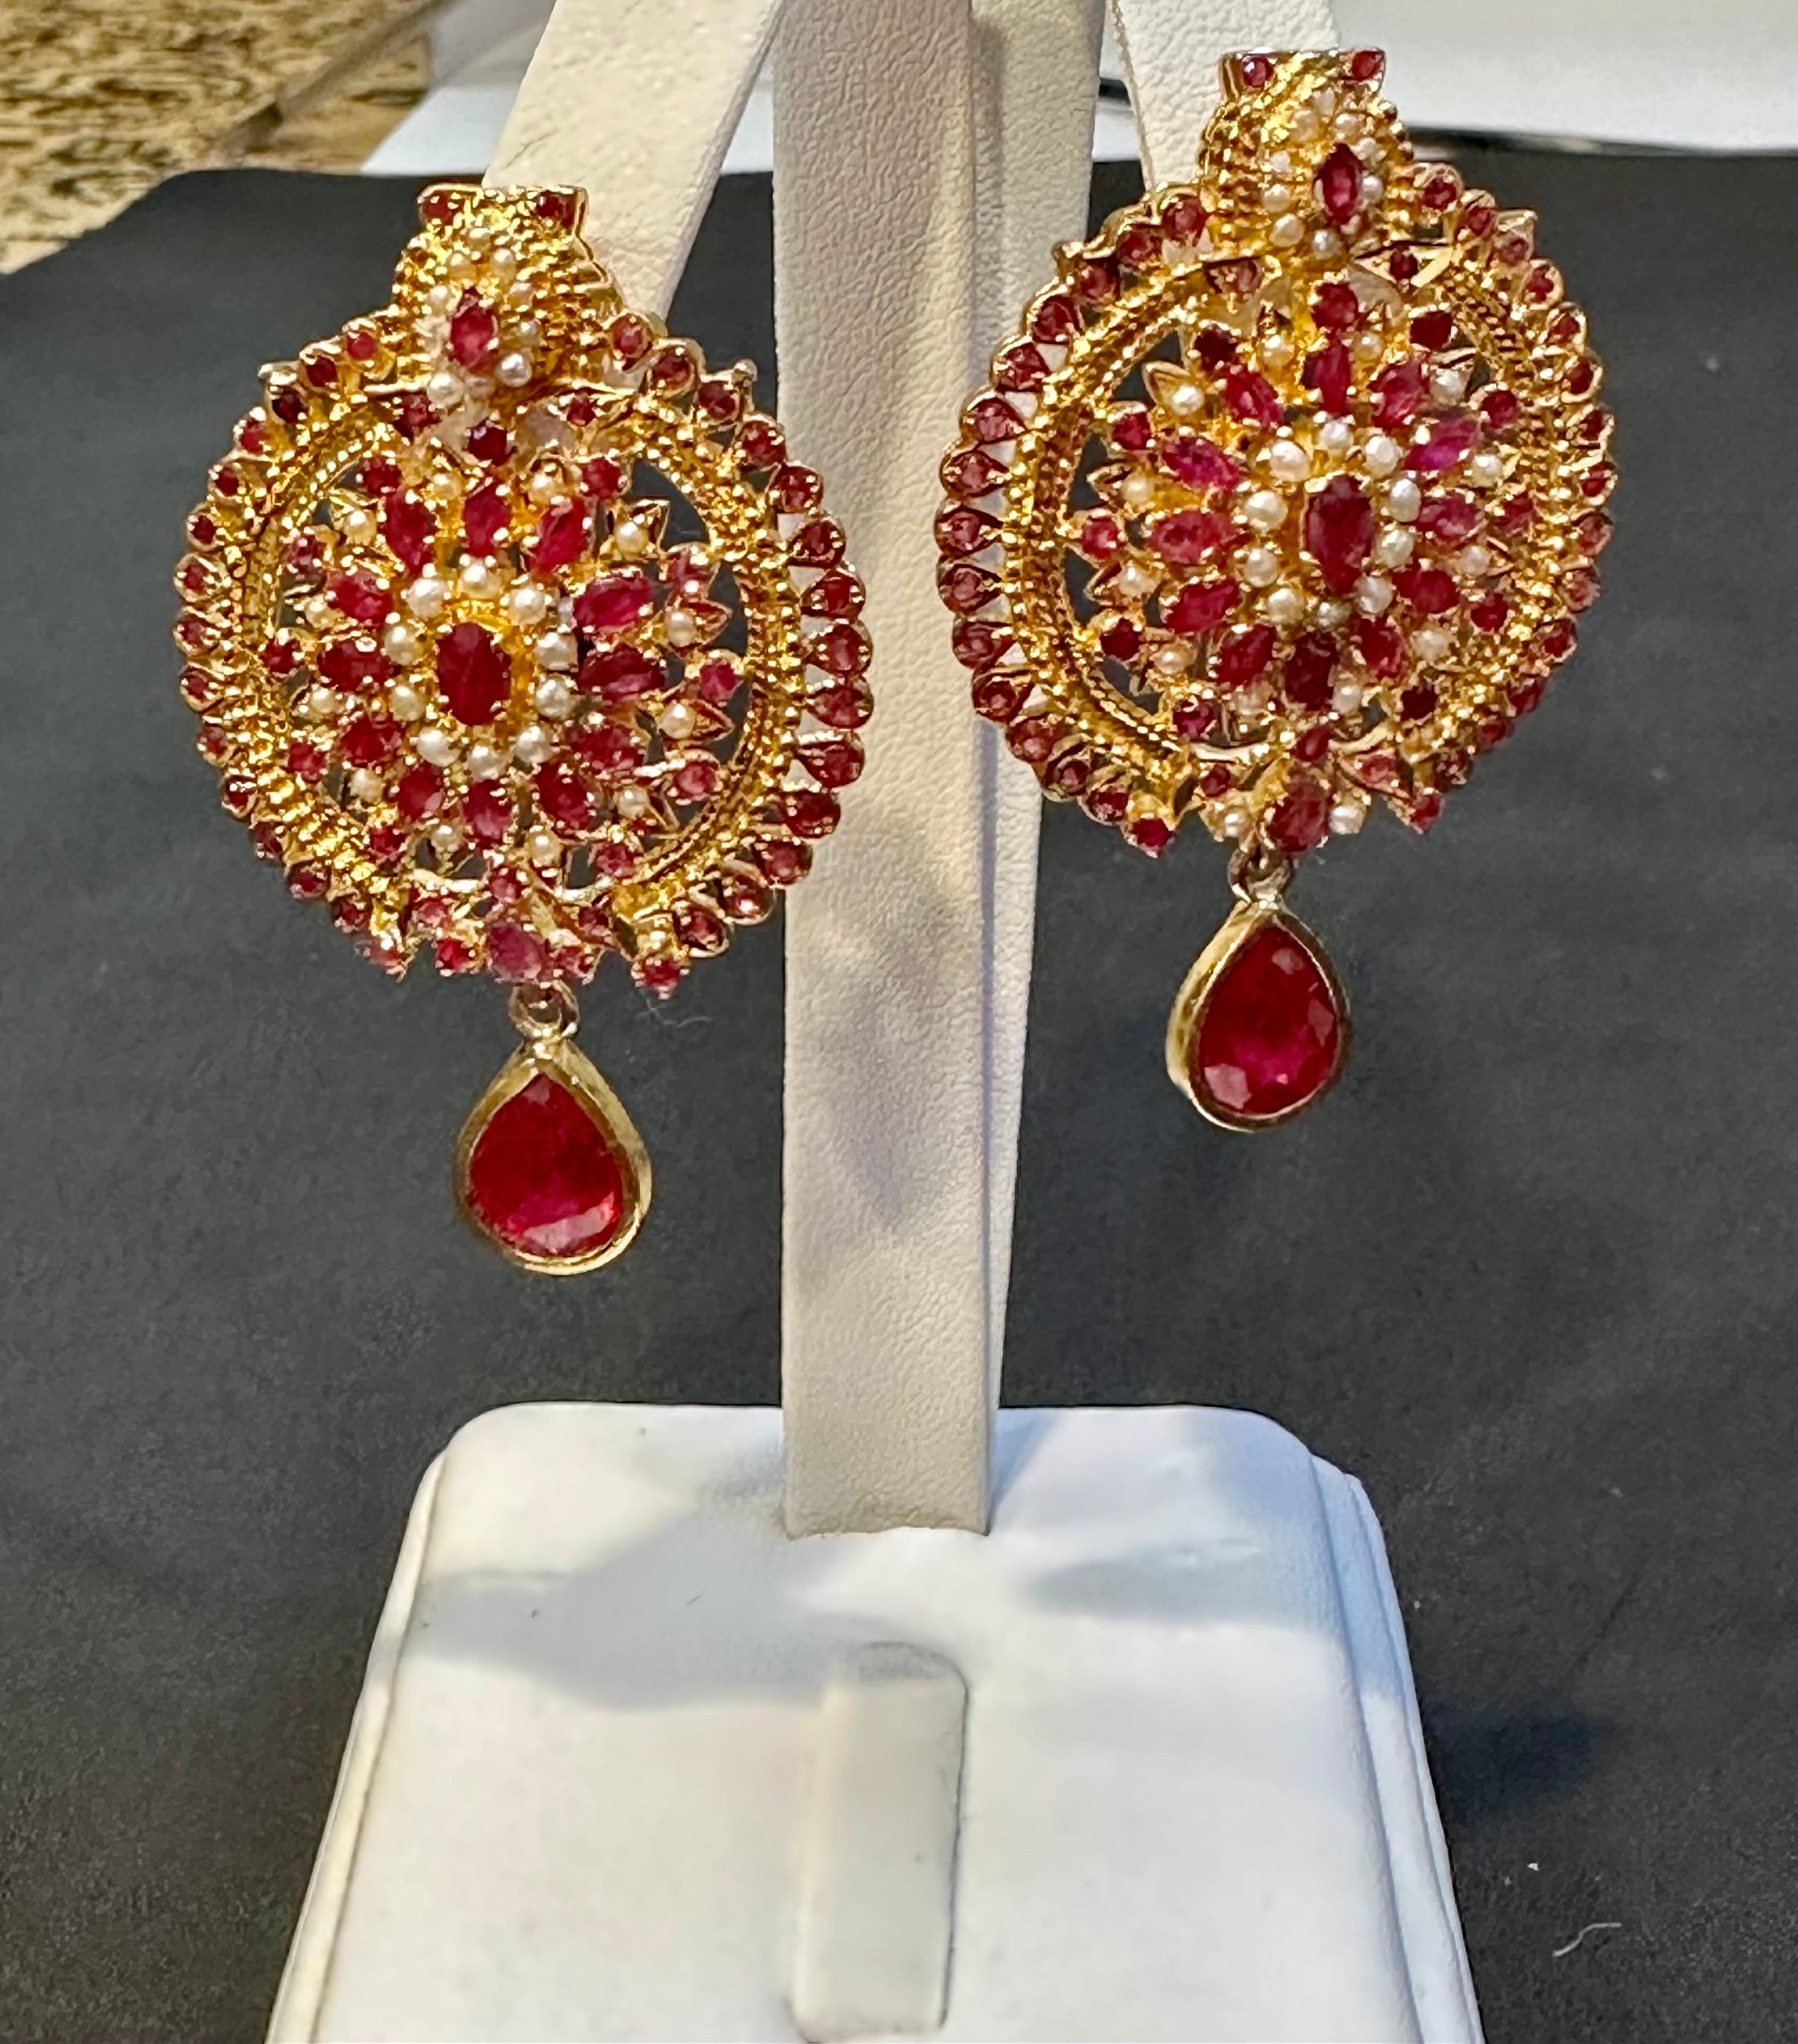 These exquisite stud earrings are a stunning example of fine jewelry craftsmanship. They are beautifully crafted with 22 karat yellow gold, making them a valuable addition to any collection. The earrings are post style with omega backs, ensuring